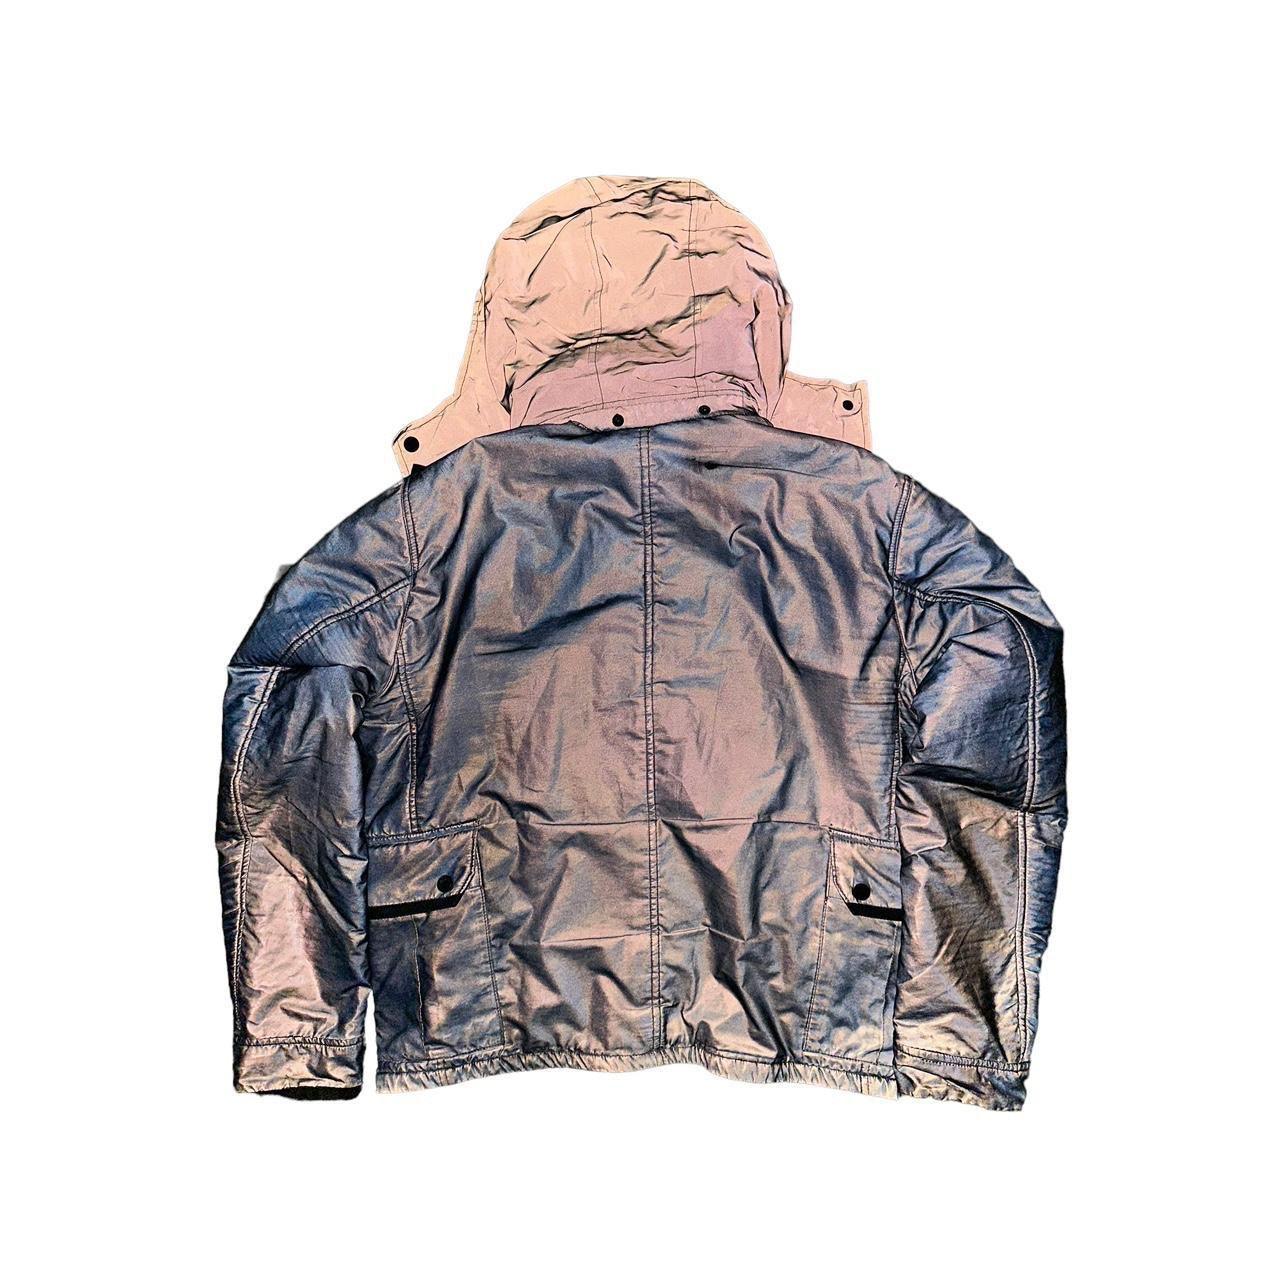 Stone Island Liquid Reflective Jacket from A/W 2012 - Known Source